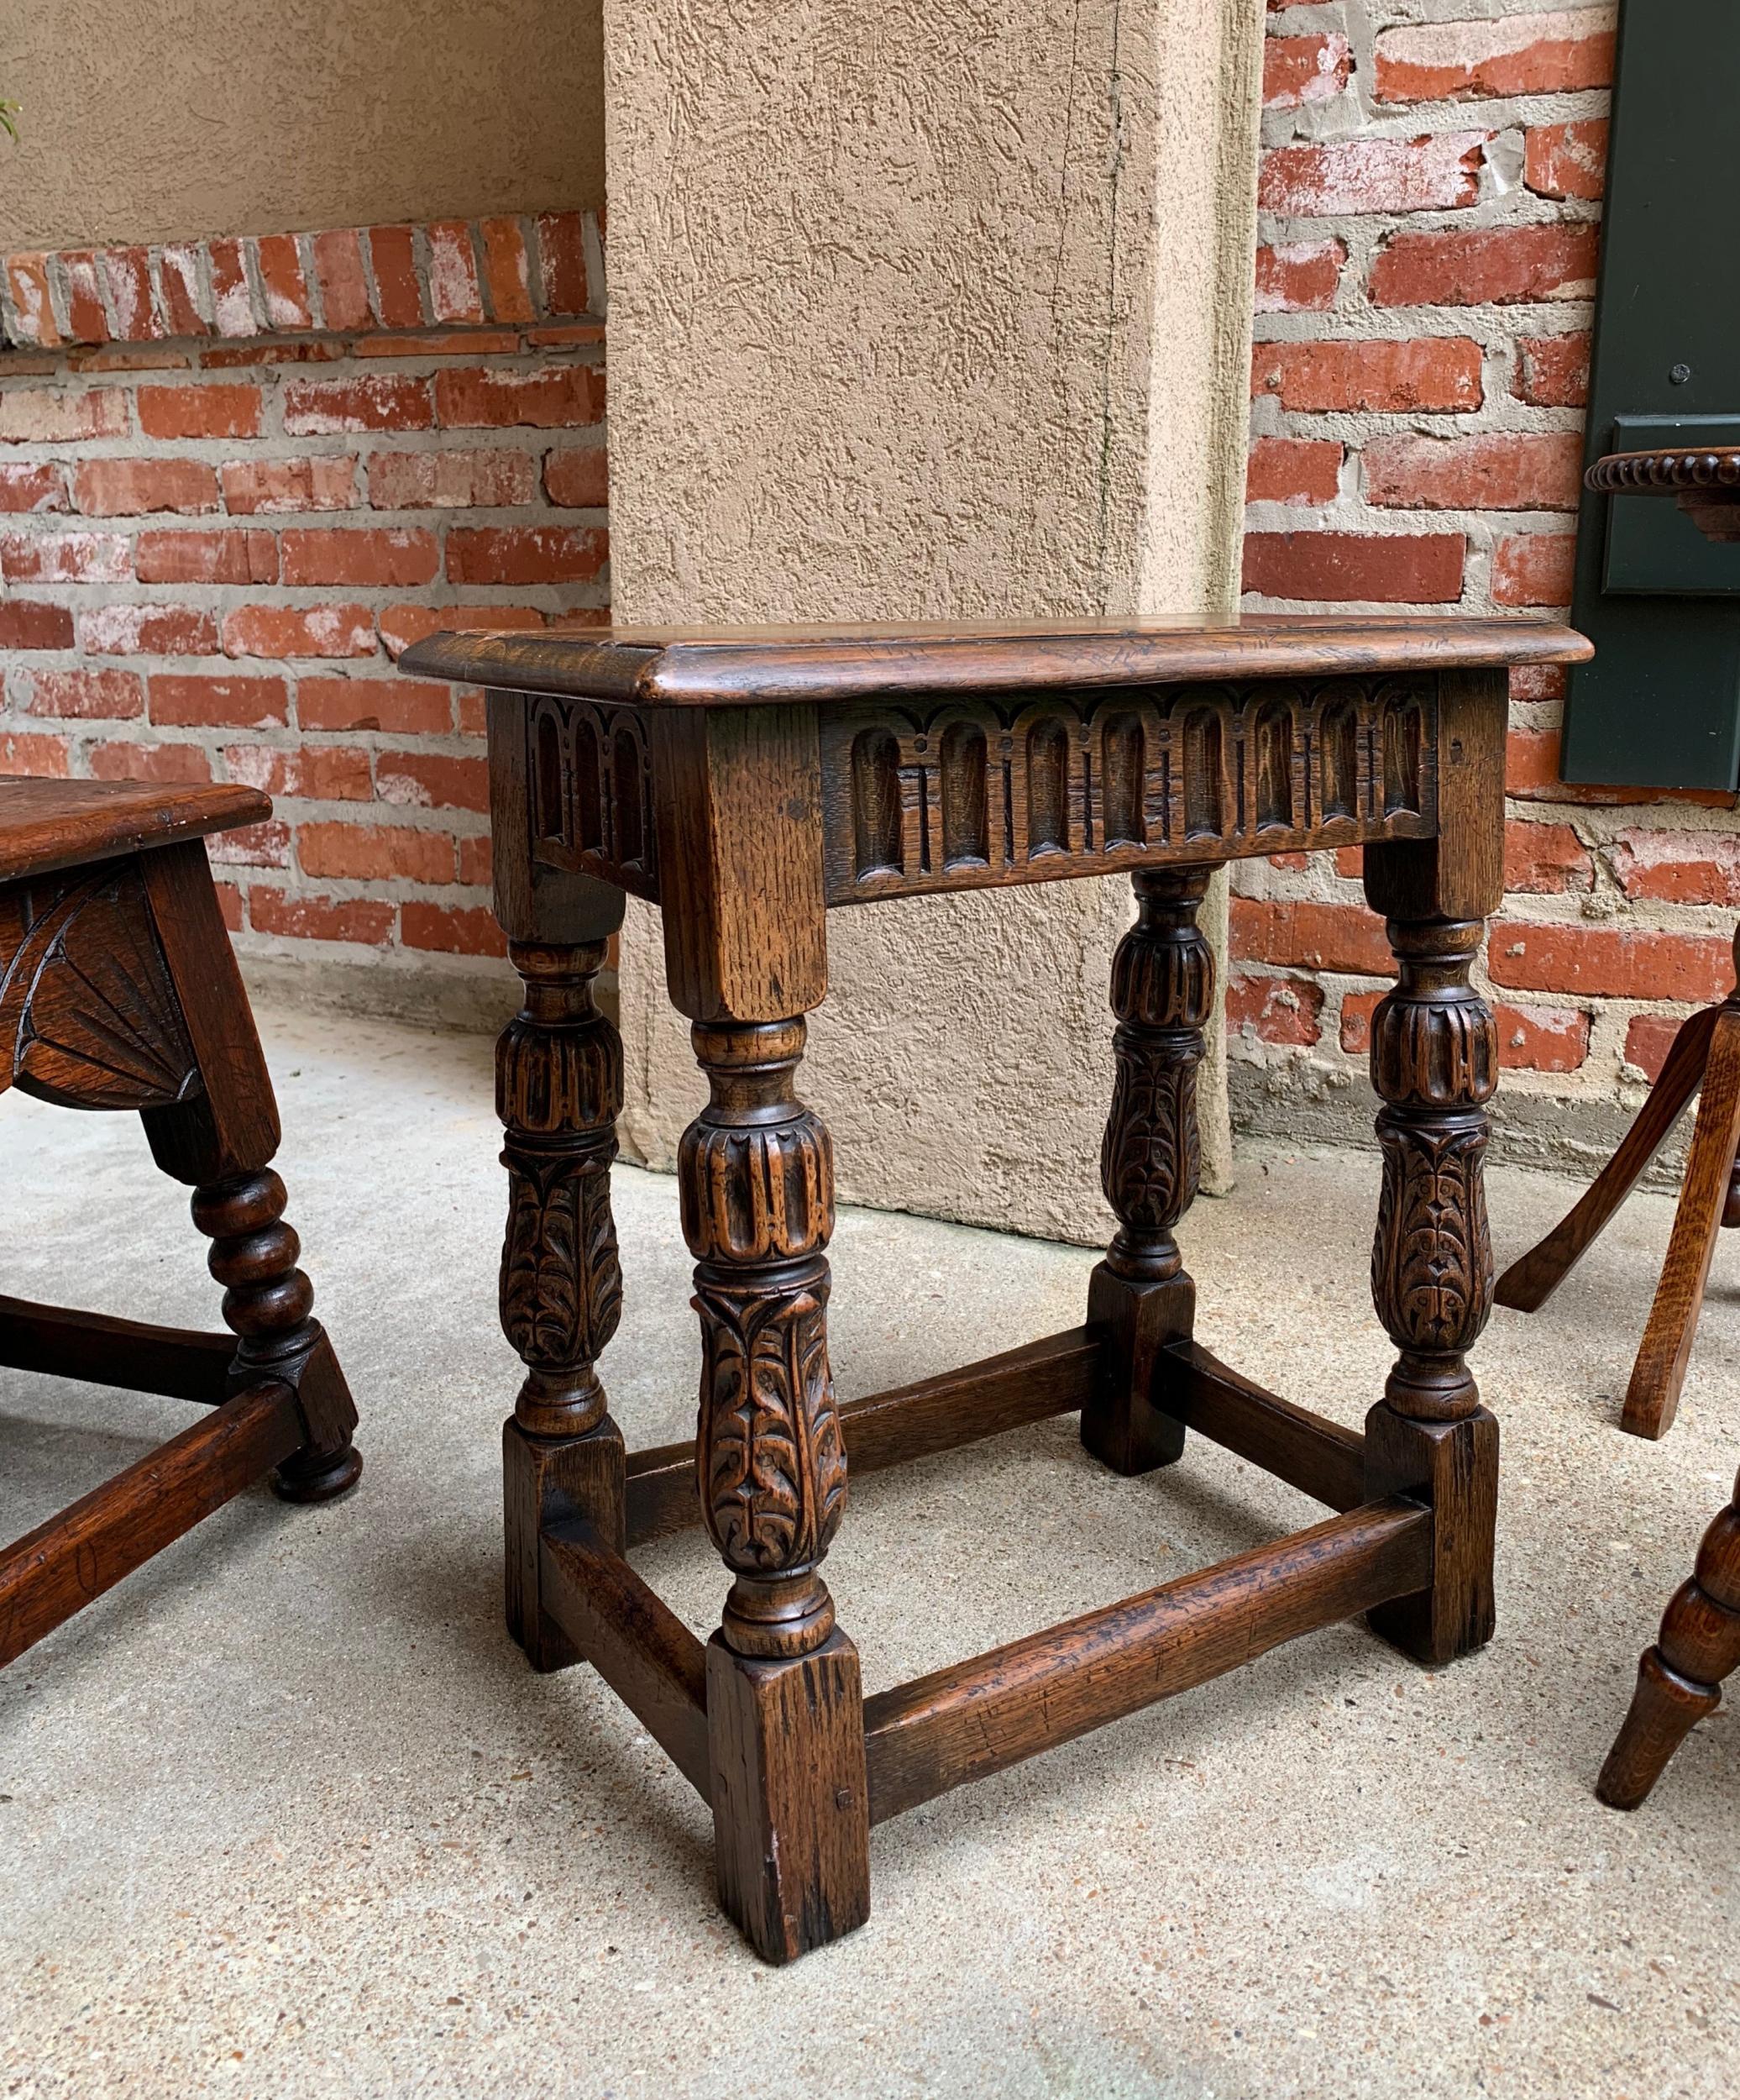 Antique English carved oak bench stool end table Jacobean joint style

~Direct from England~
~One of several outstanding small carved antique English benches/stools from our latest container!~
~This one is an English “classic”, in the style of a